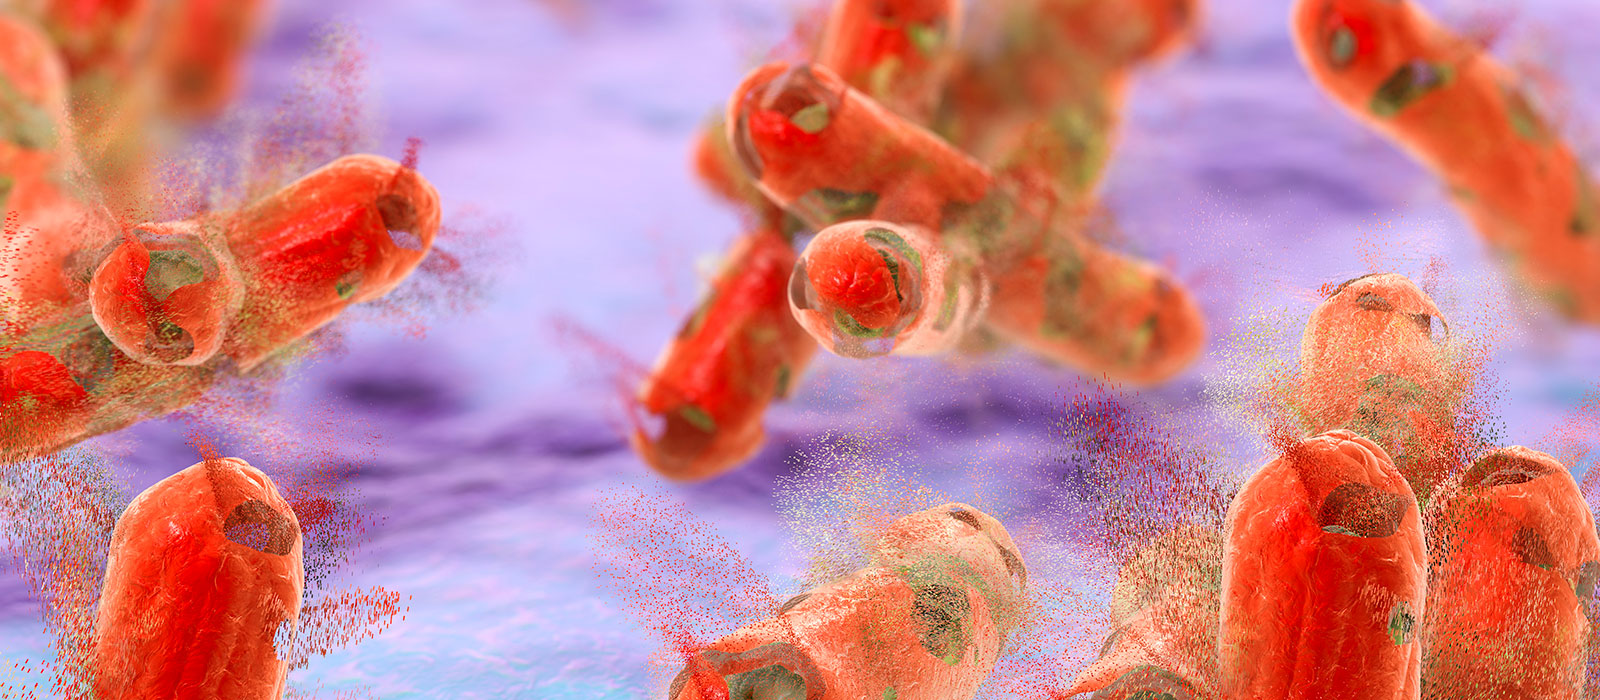 Understanding the Role of Antibodies in Protecting Against Tuberculosis